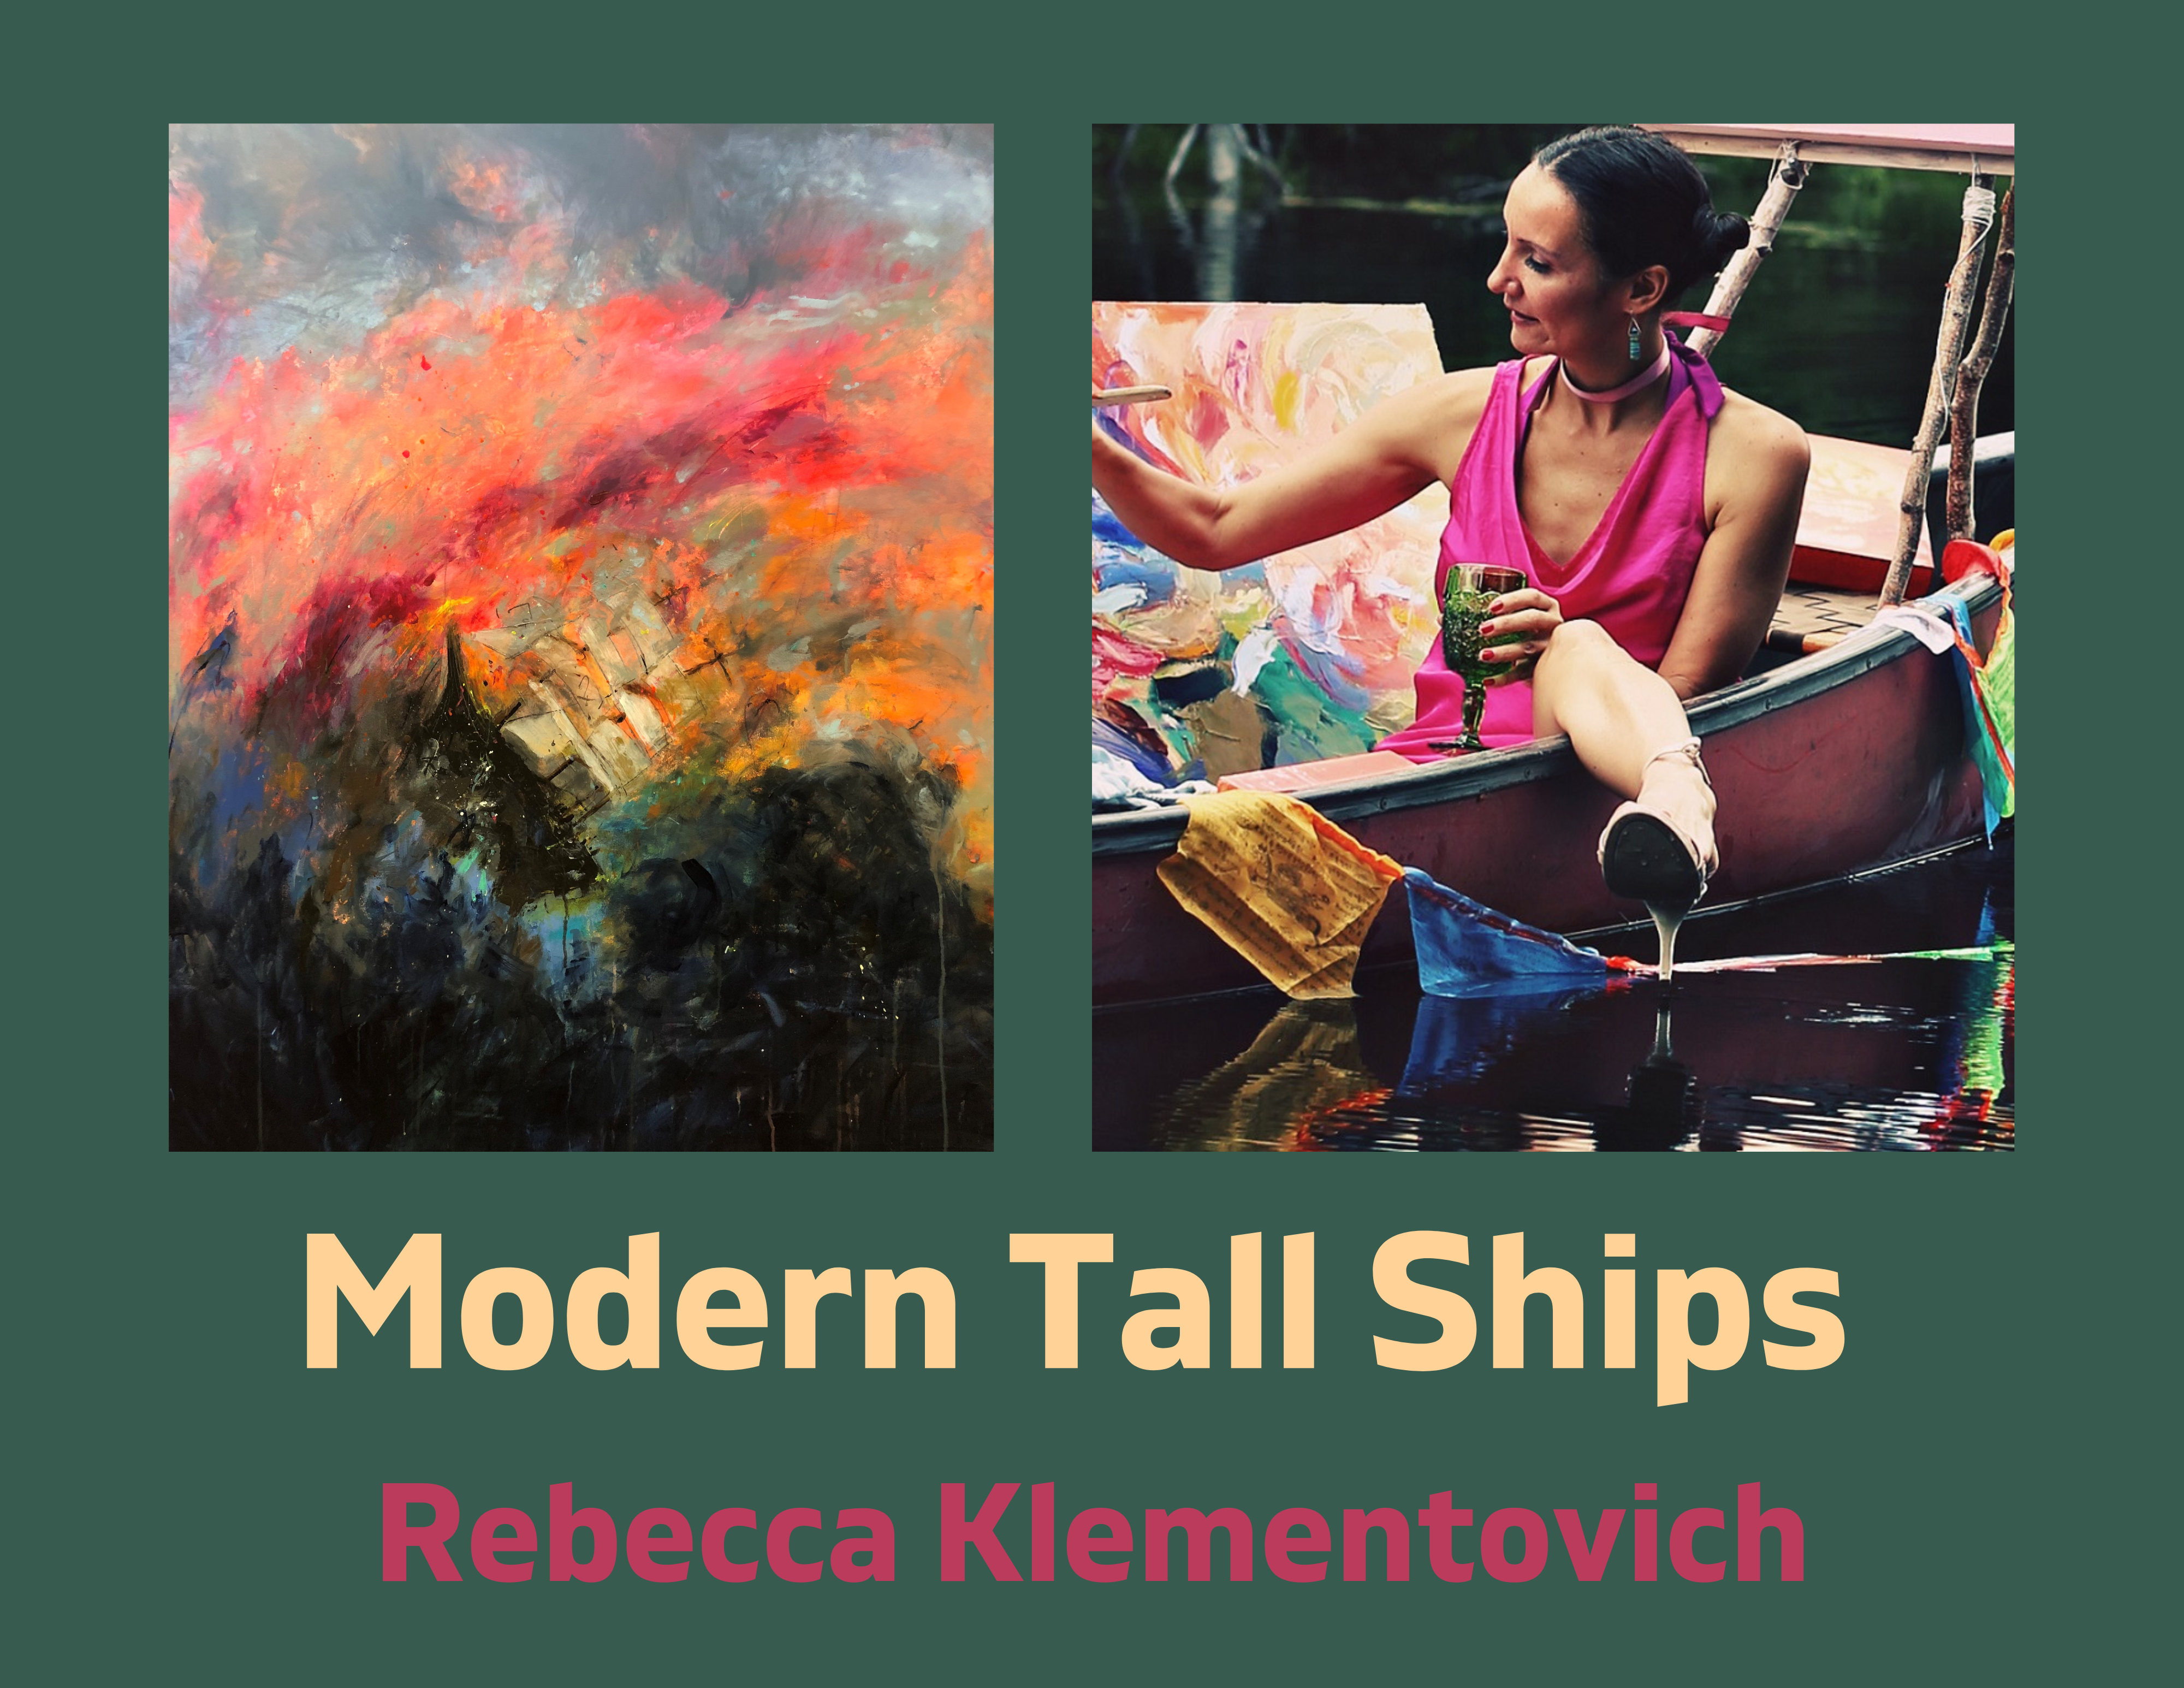 Woman in a boat painting  alongside a painting with colorful red sky and abstract ship Modern Tall Ships by Rebecca Klementovich